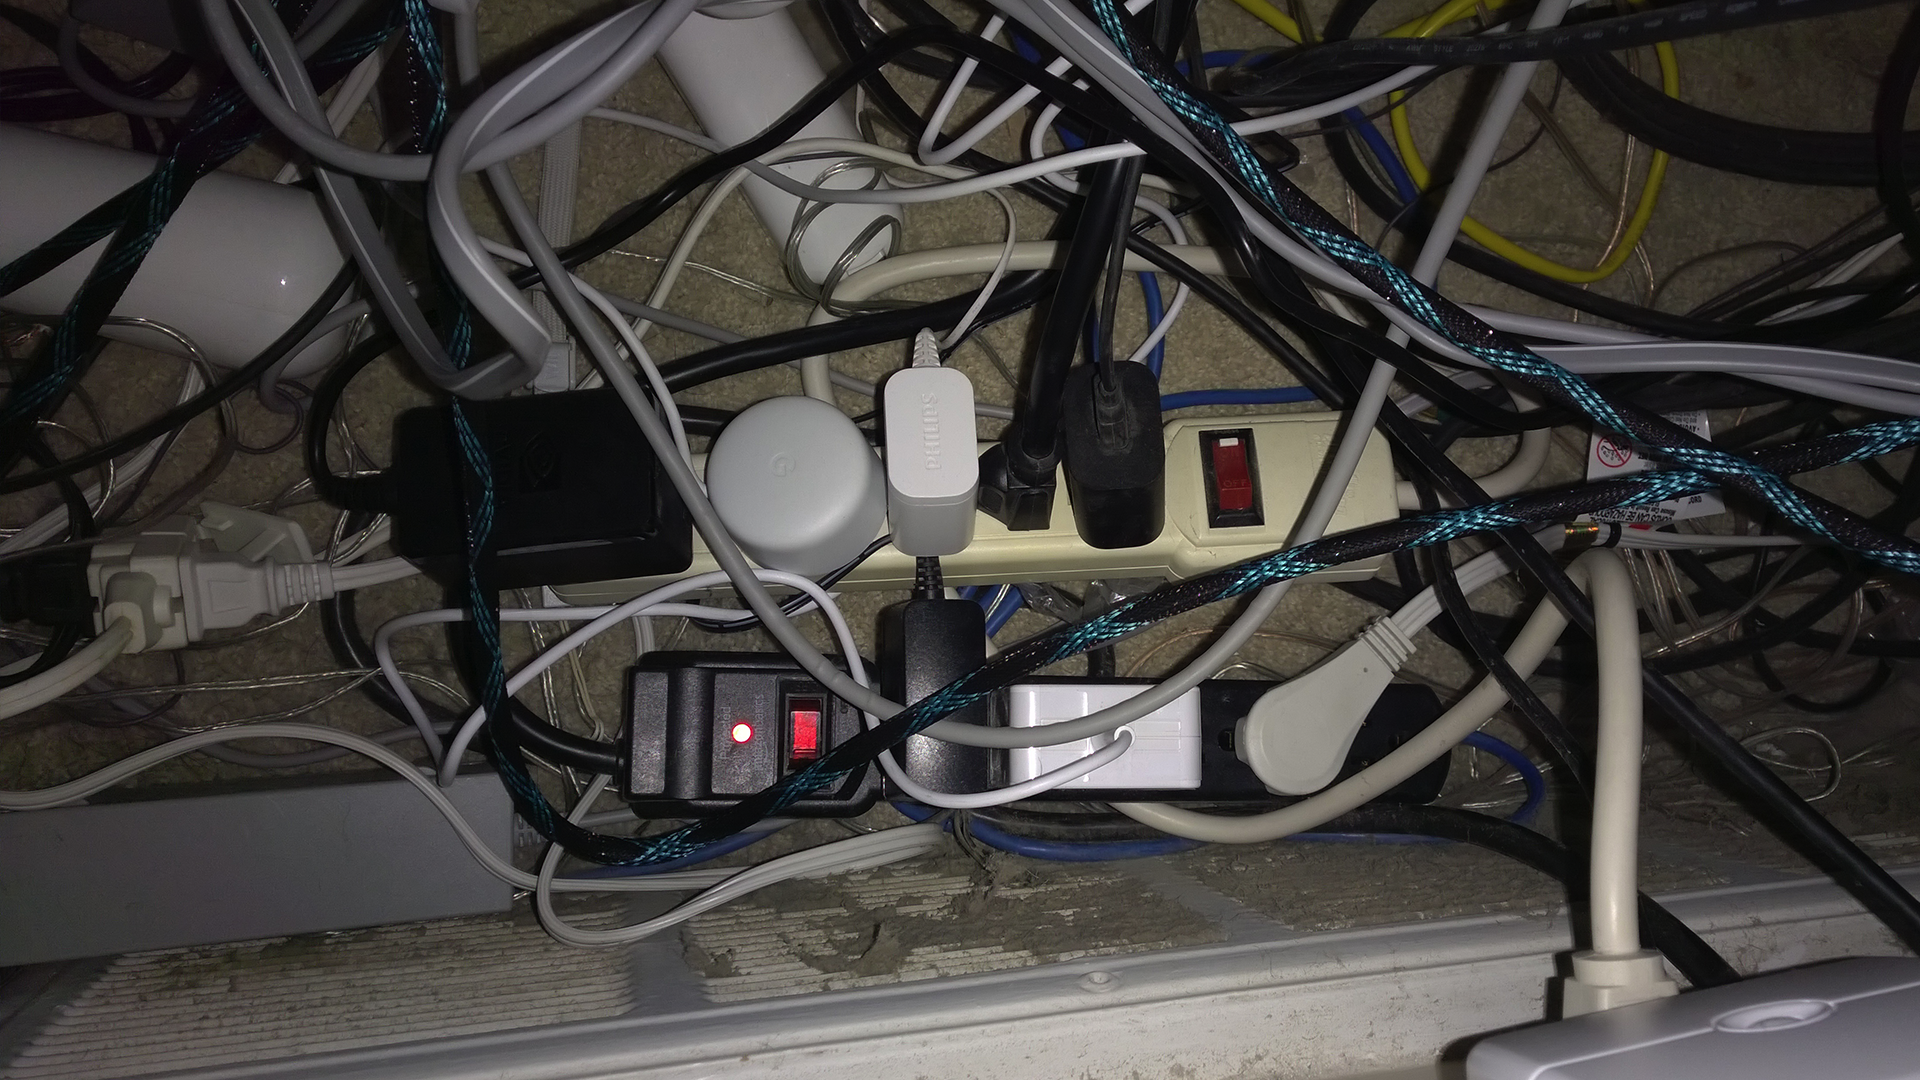 The worst mess of surge protectors and dust you've ever seen.